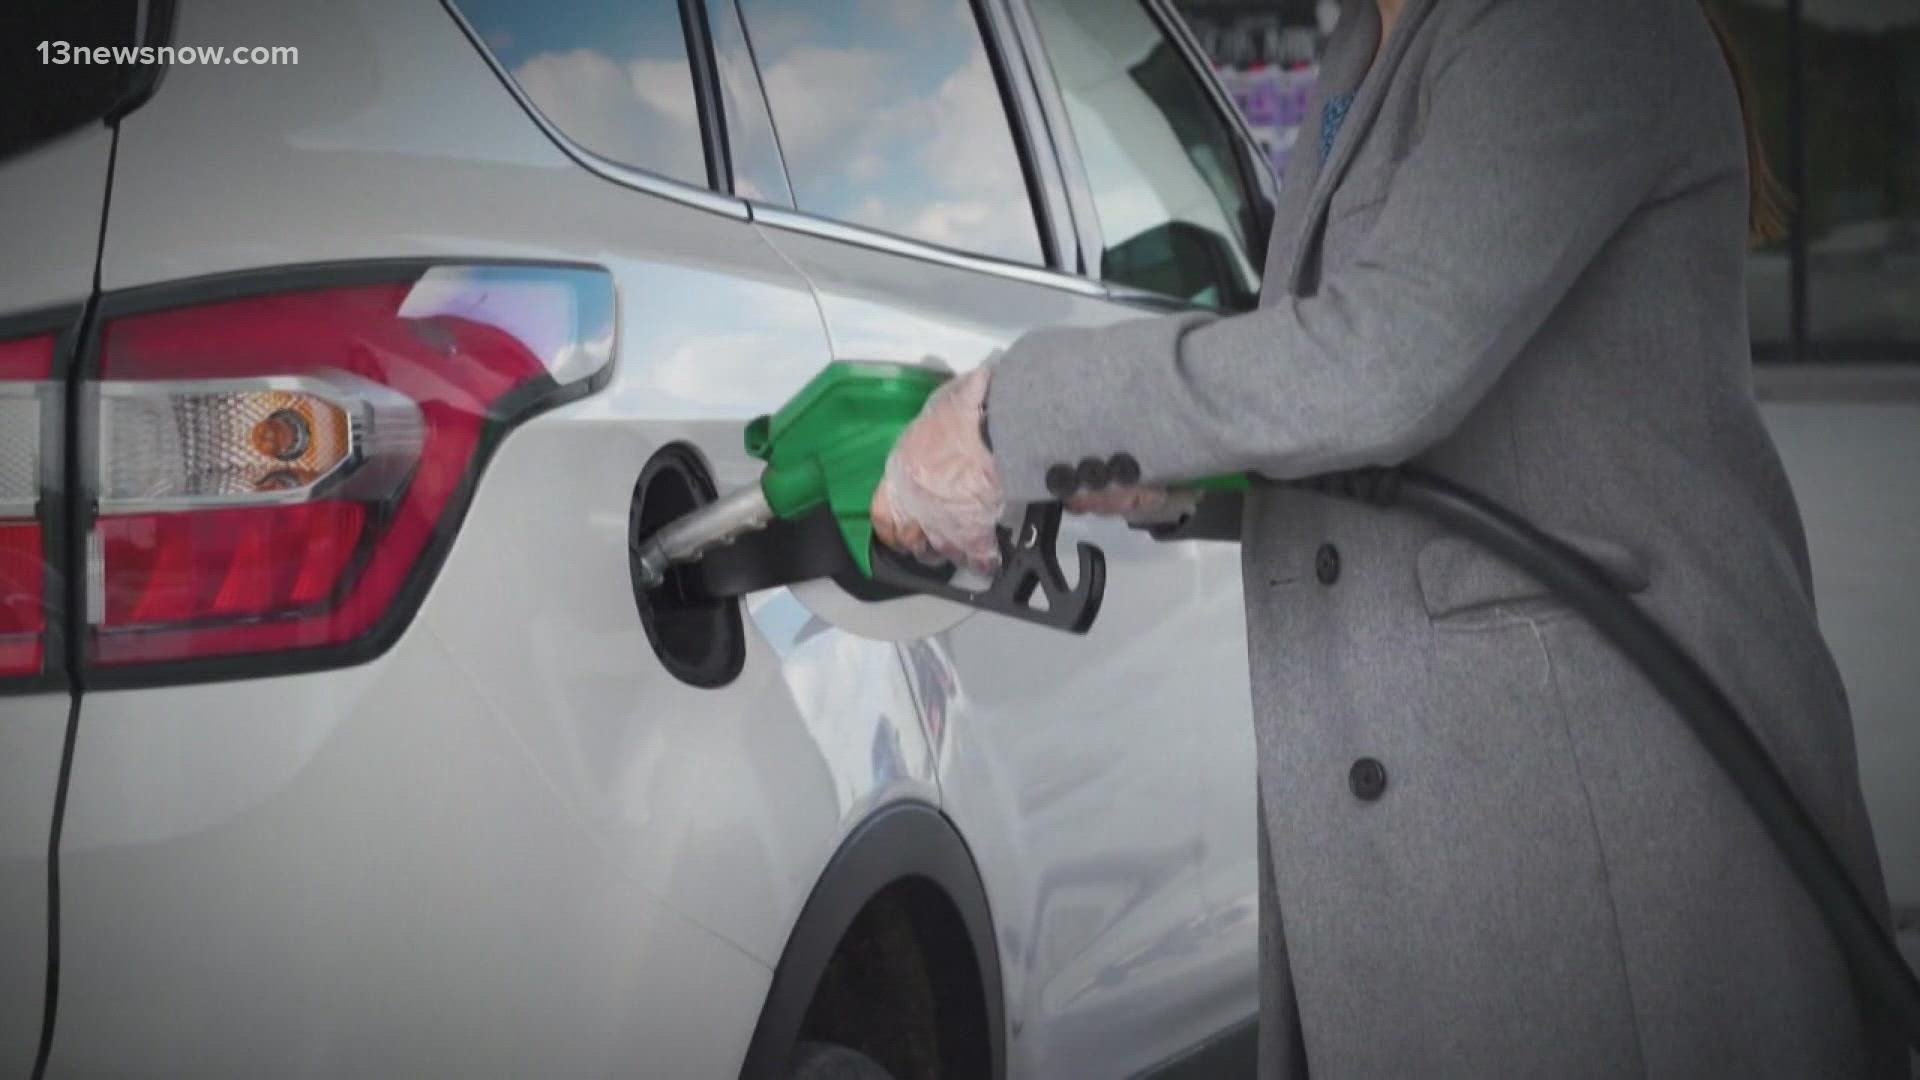 If approved by Virginia lawmakers, the gas tax would be suspended for the months of May, June and July. Then, it would slowly phase back in August and September.